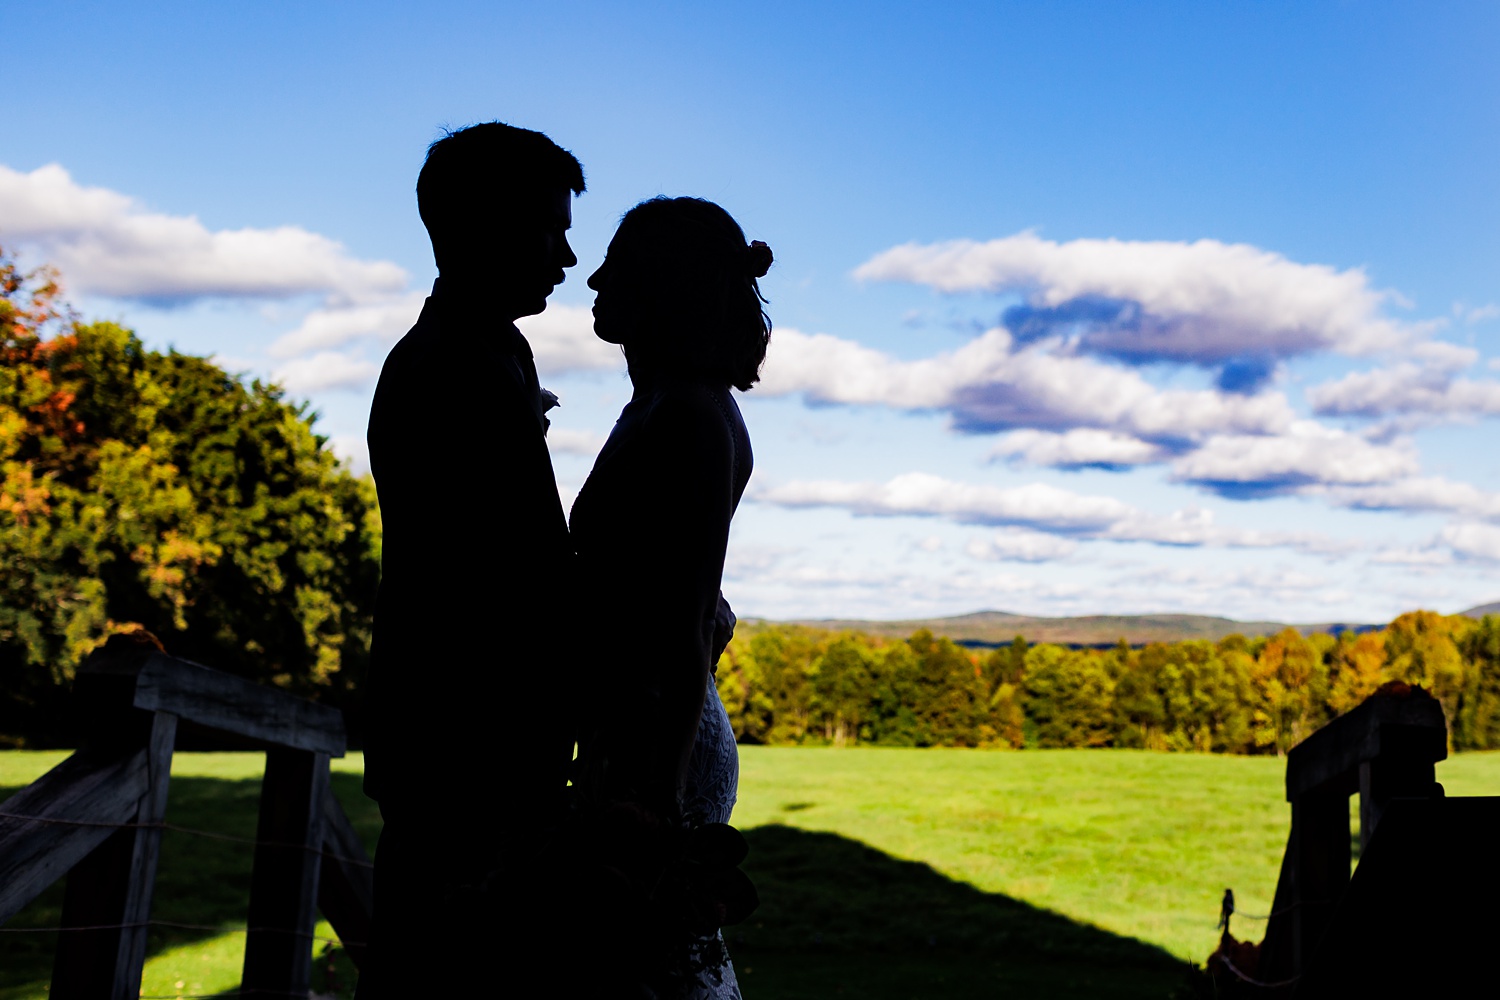 Silhouette from inside the barn overlooking the mountains and sunny wedding day